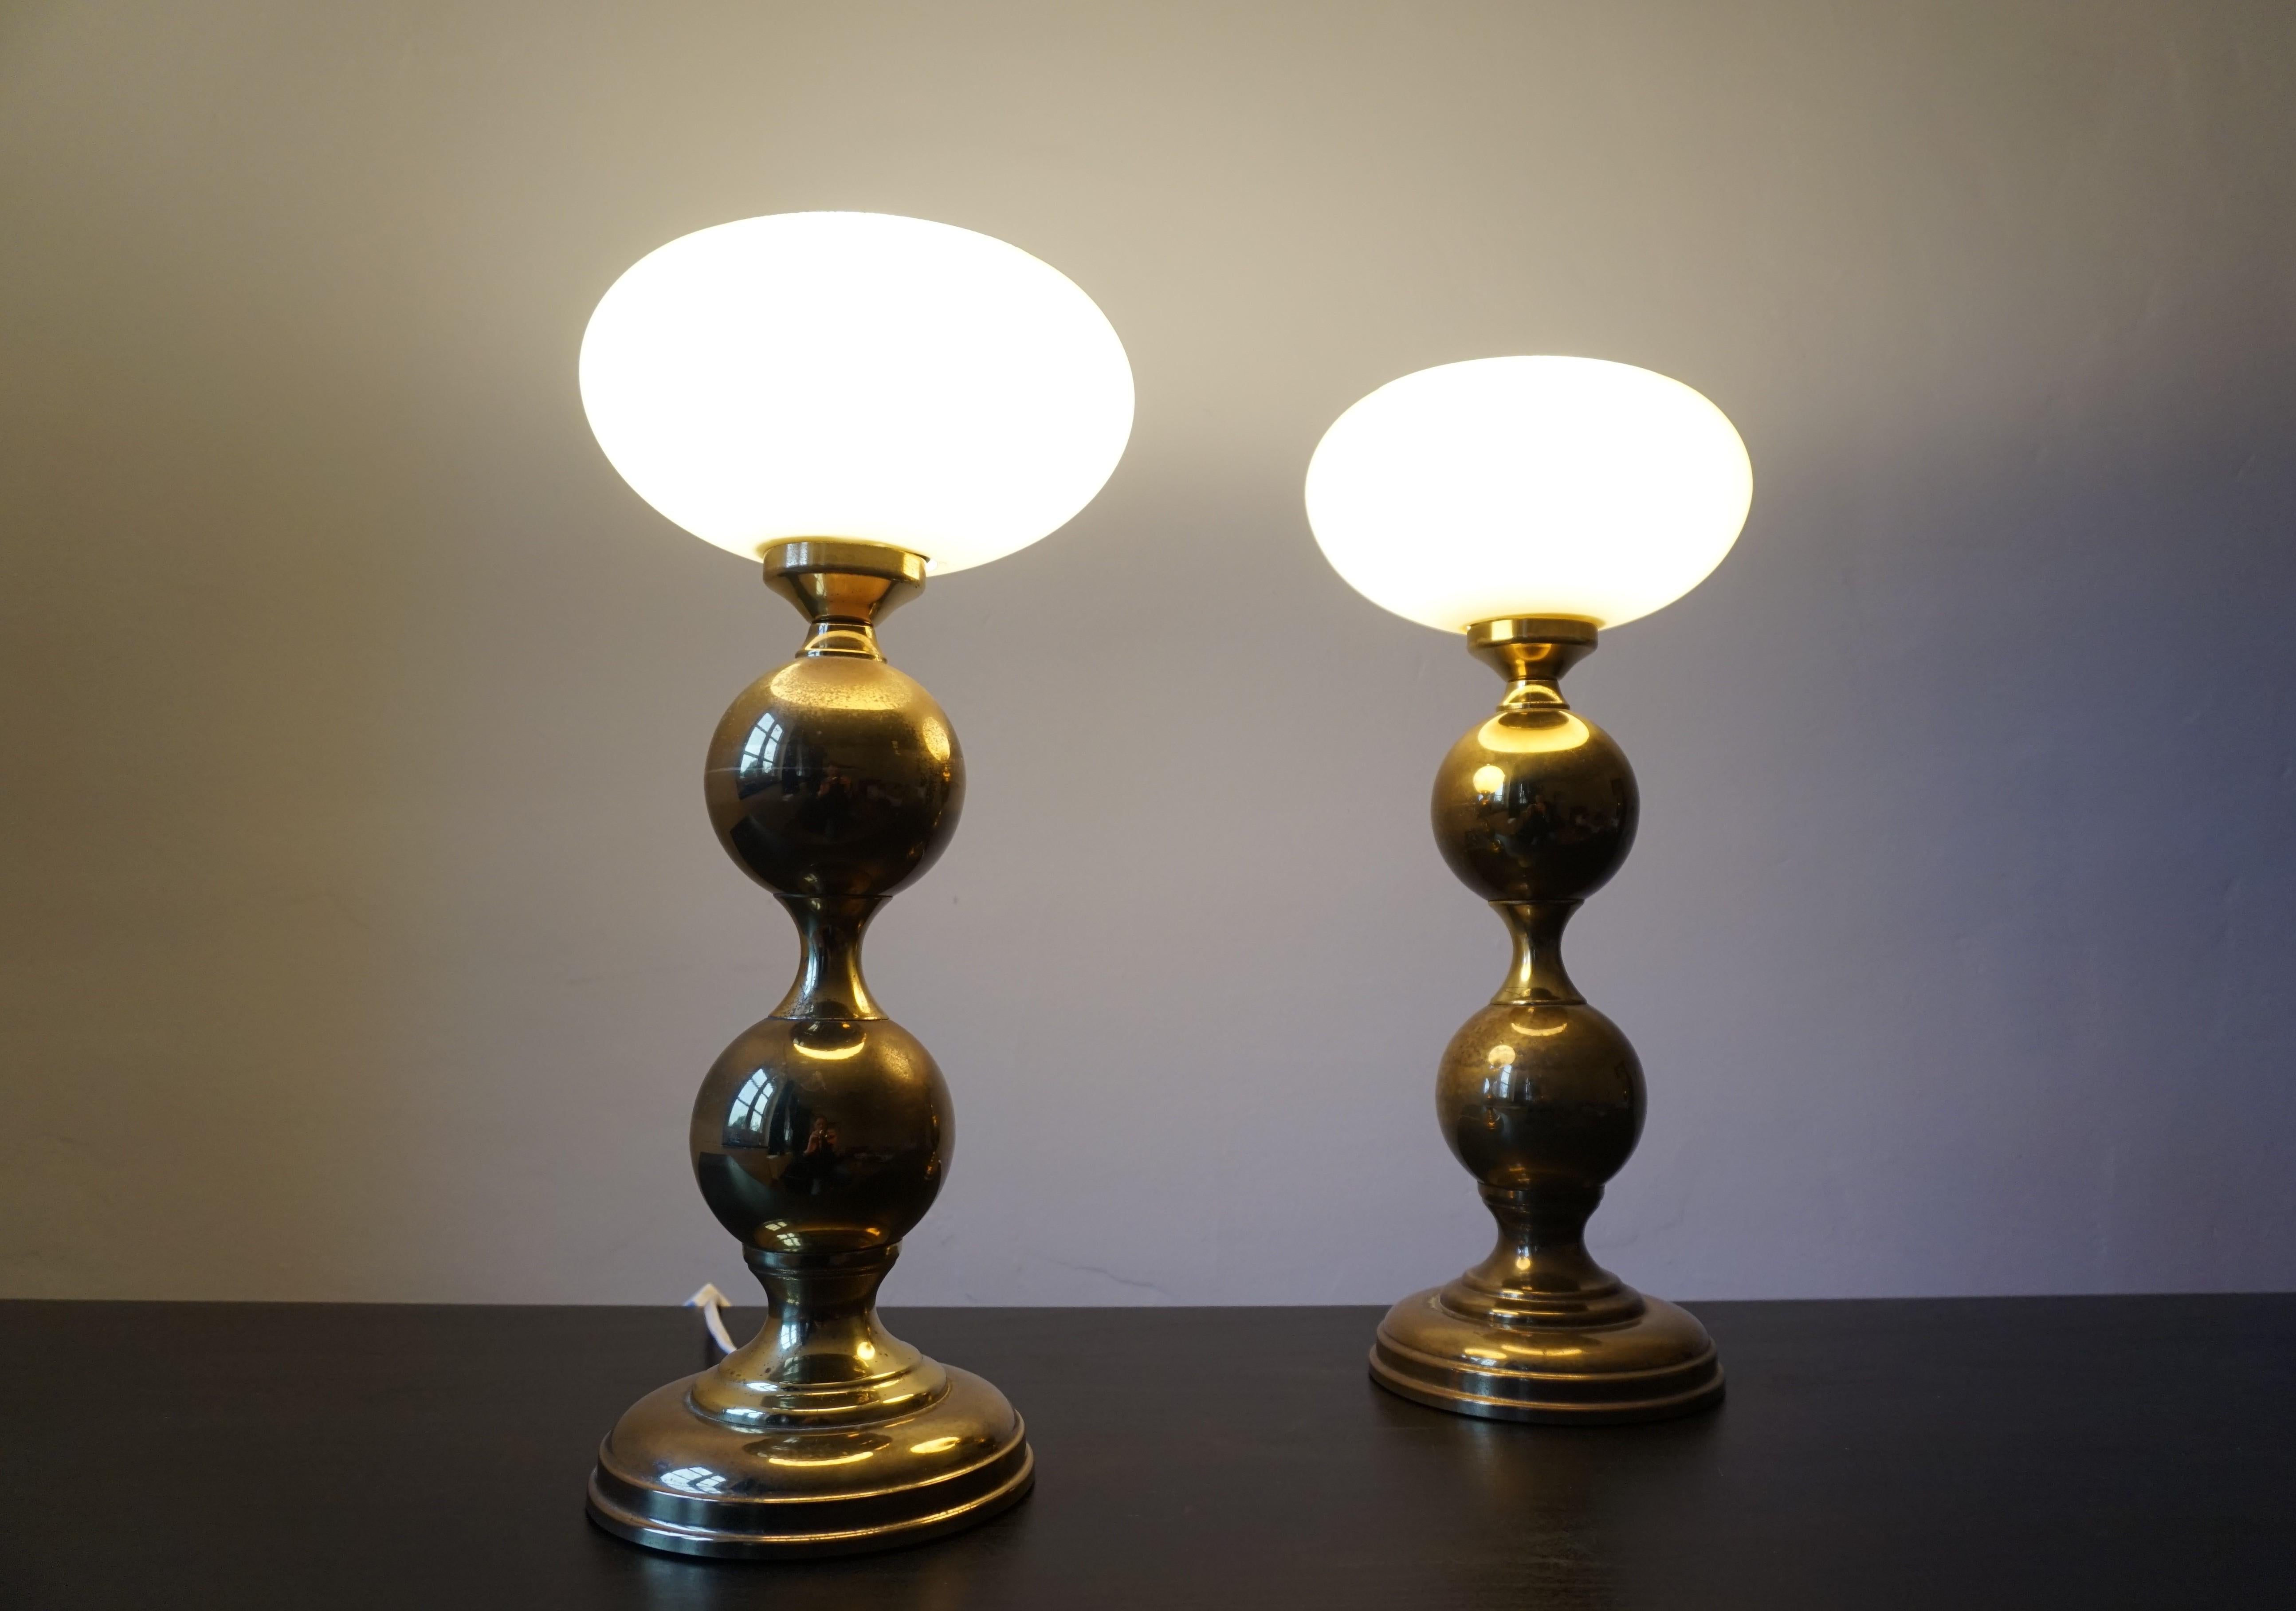 A set of 2 brass lamps with an attractive patina from the 70s. The lamps have a lamp base made of 2 spherical shapes and a glass bowl made of beige glass as a lampshade. The brass of the lamp bases has acquired a certain patina over time. The glass